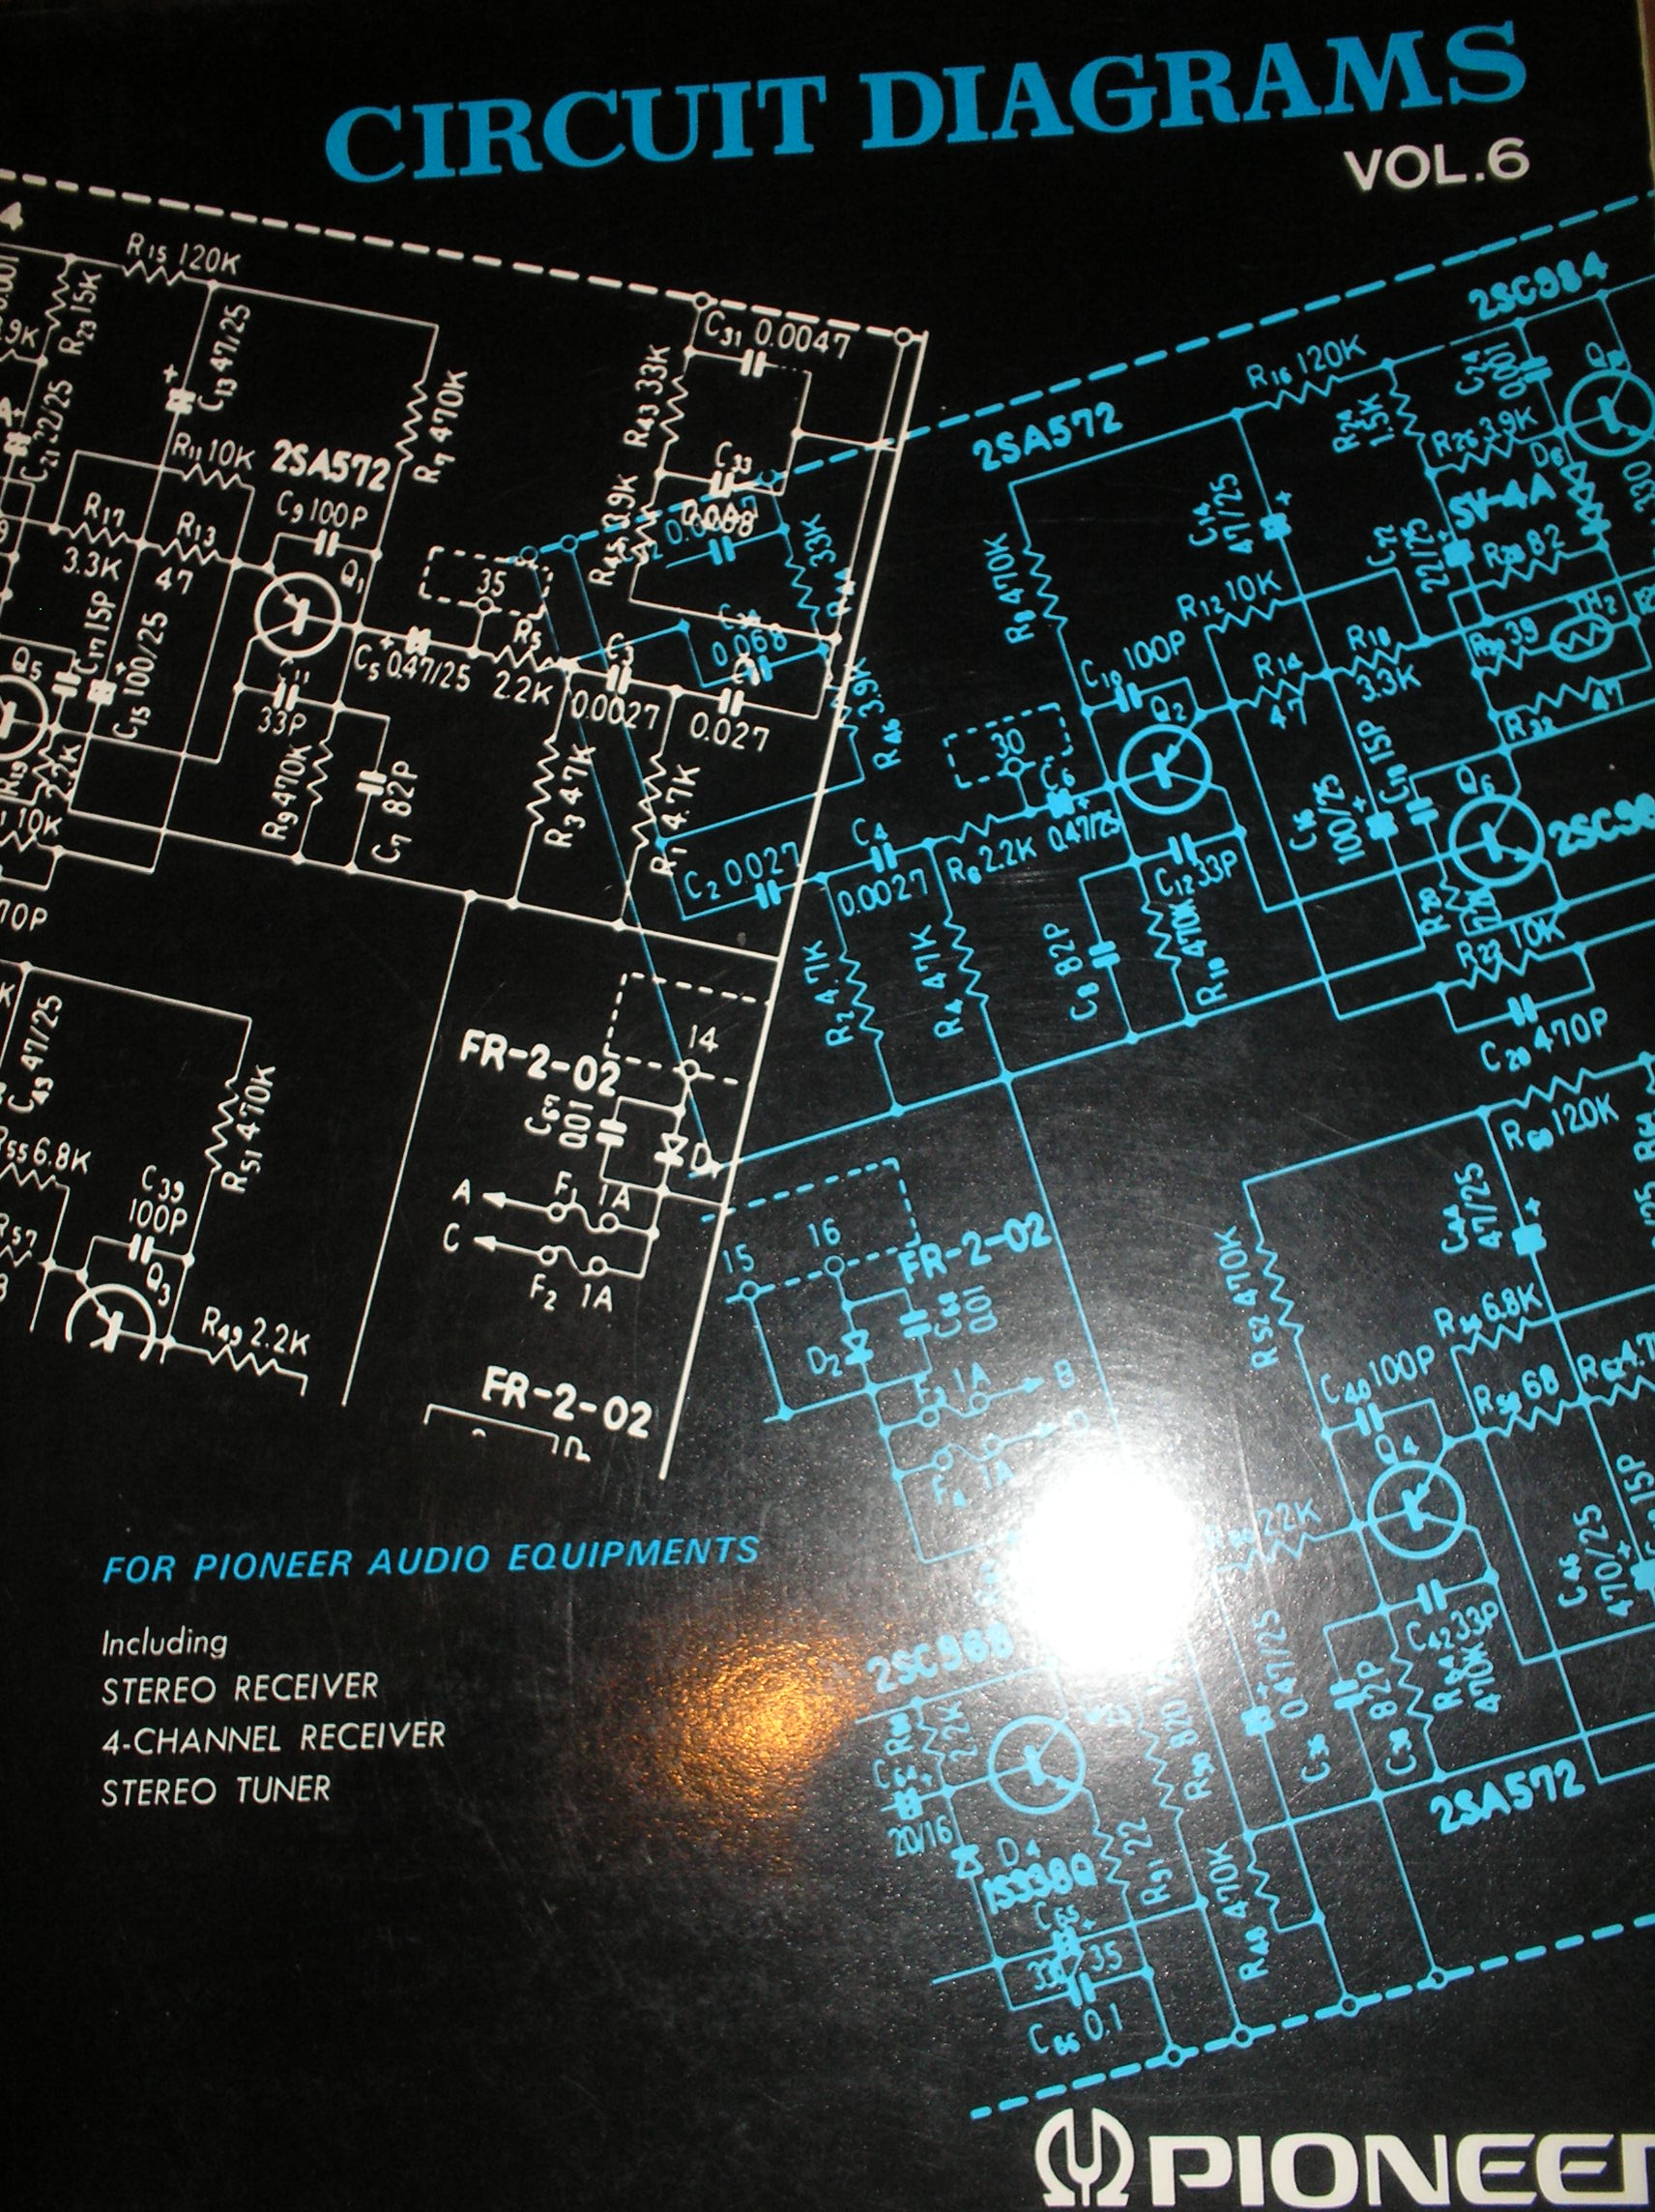 LX-424 Stereo Receiver fold out schematics.   Book 6